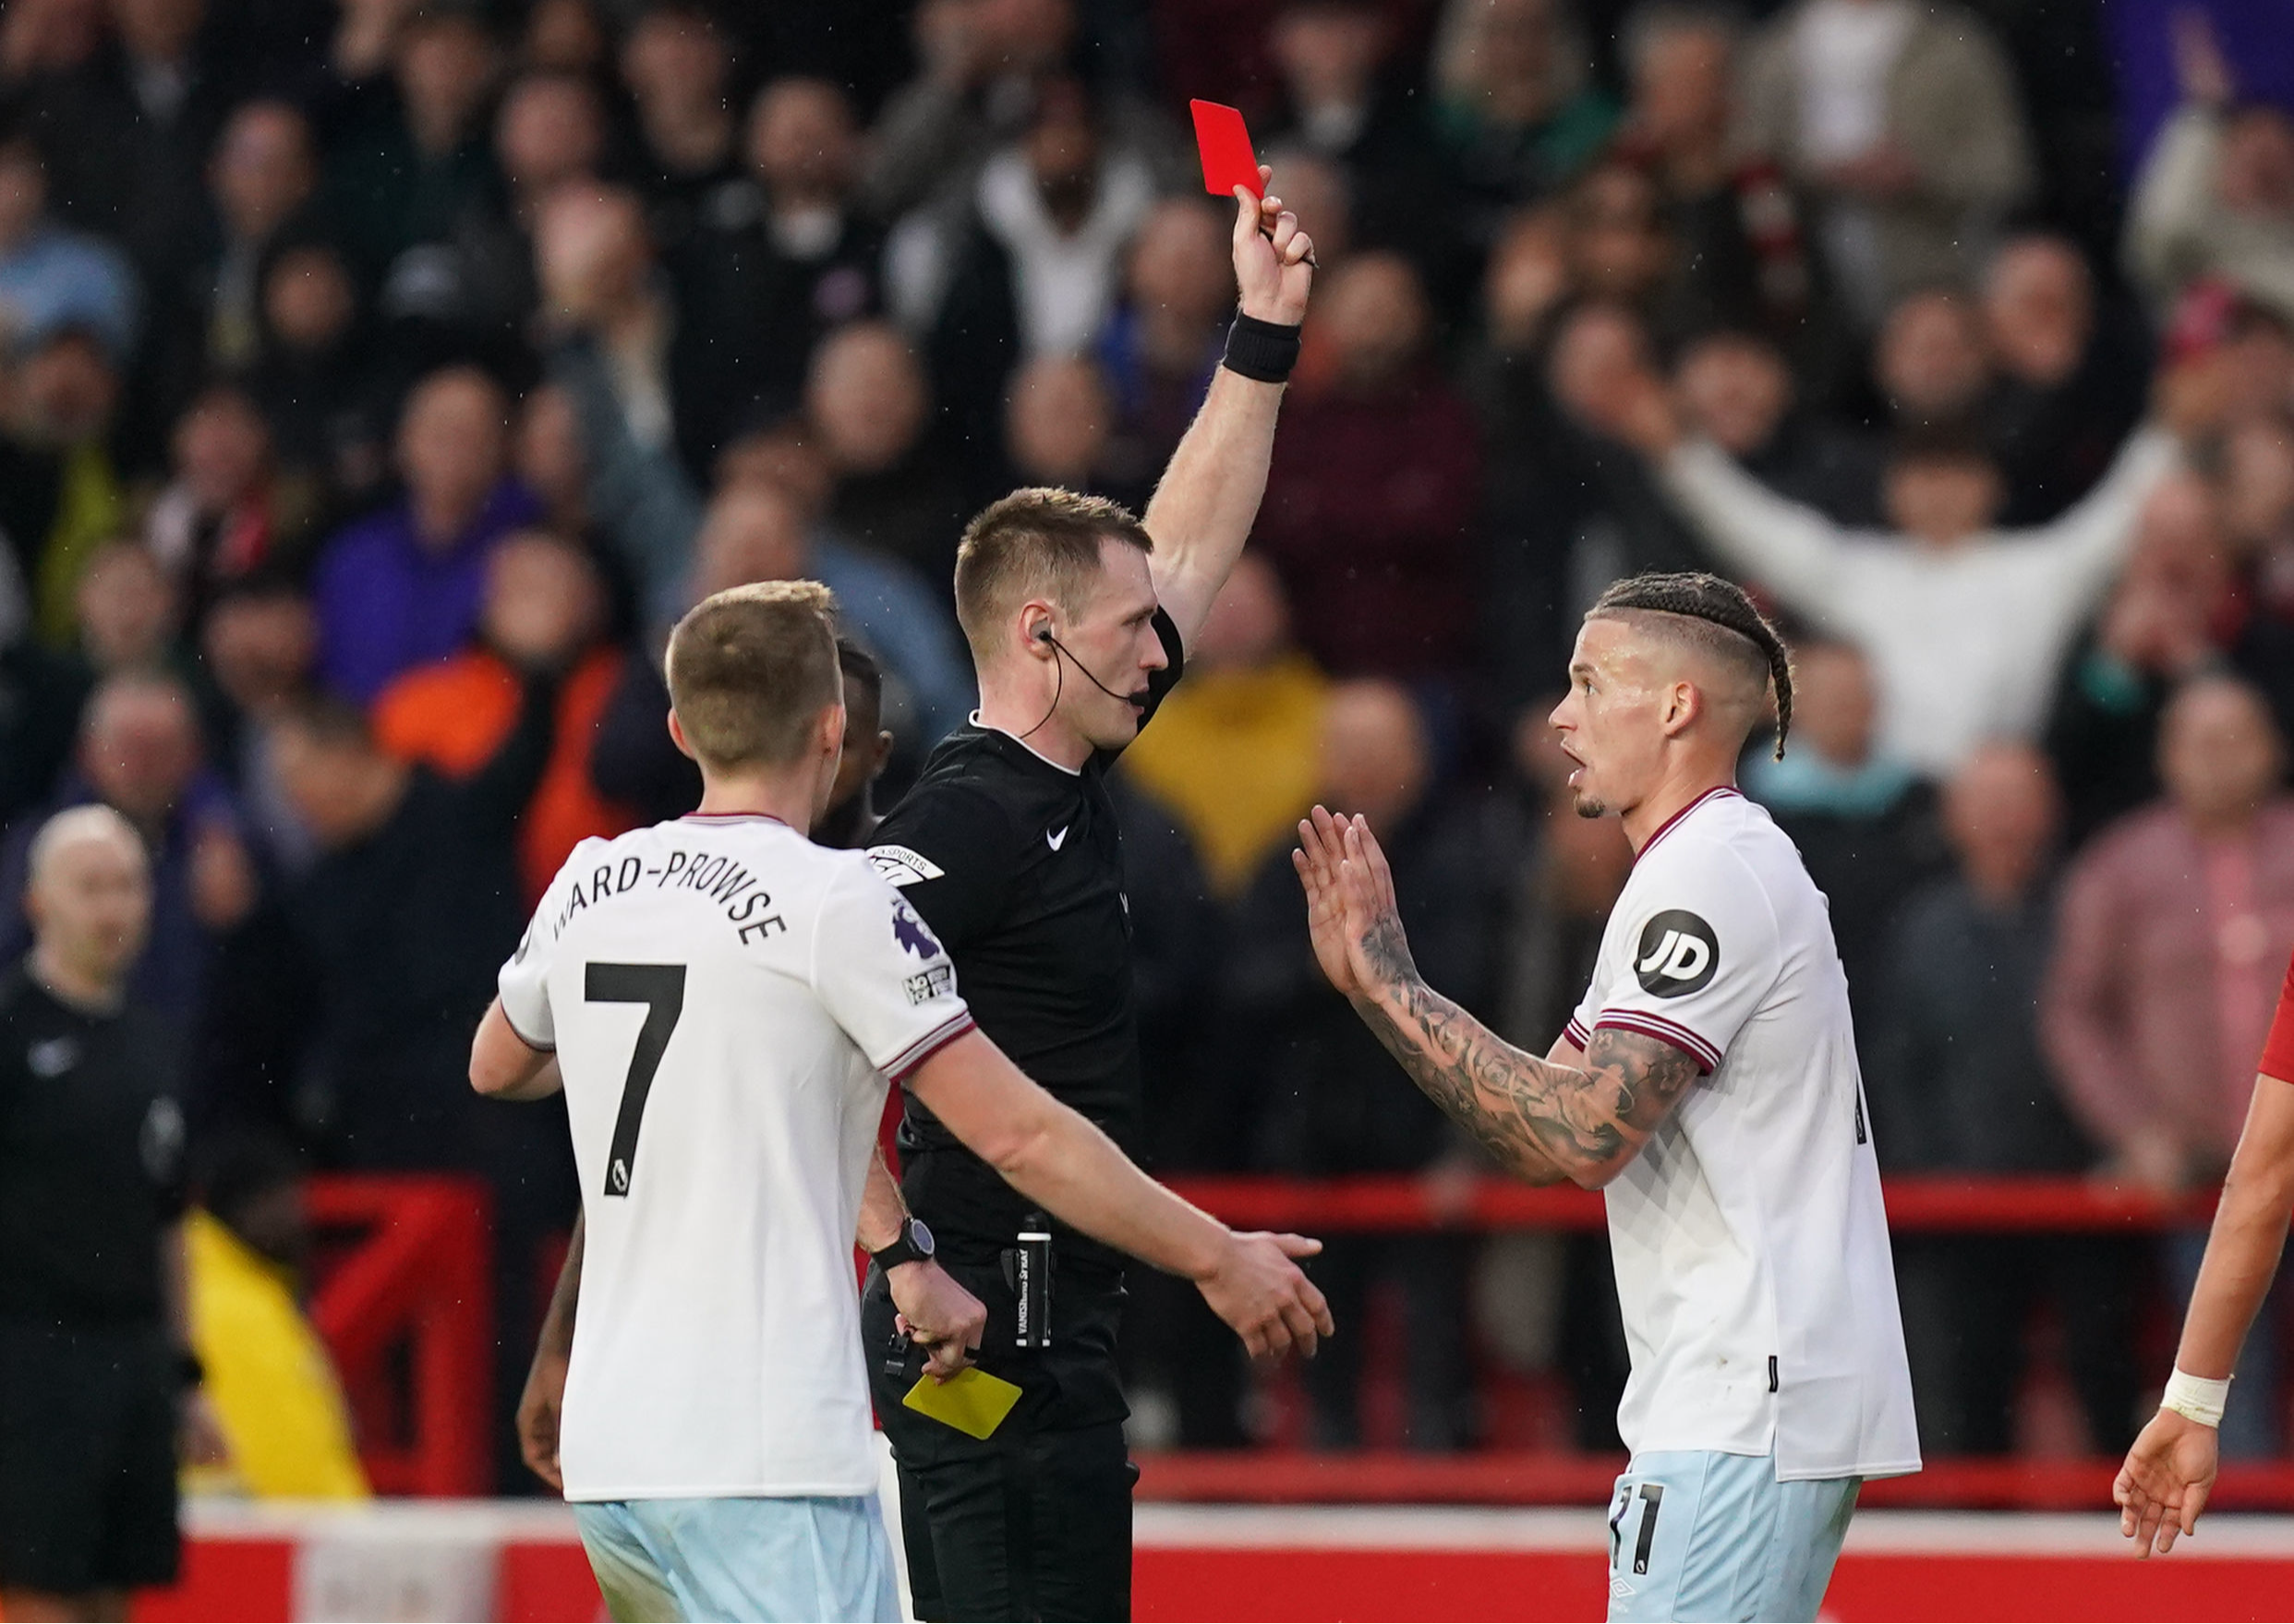 west ham in crisis mode as wait for a win (and even a goal) ticks up with defeat at nottingham forest